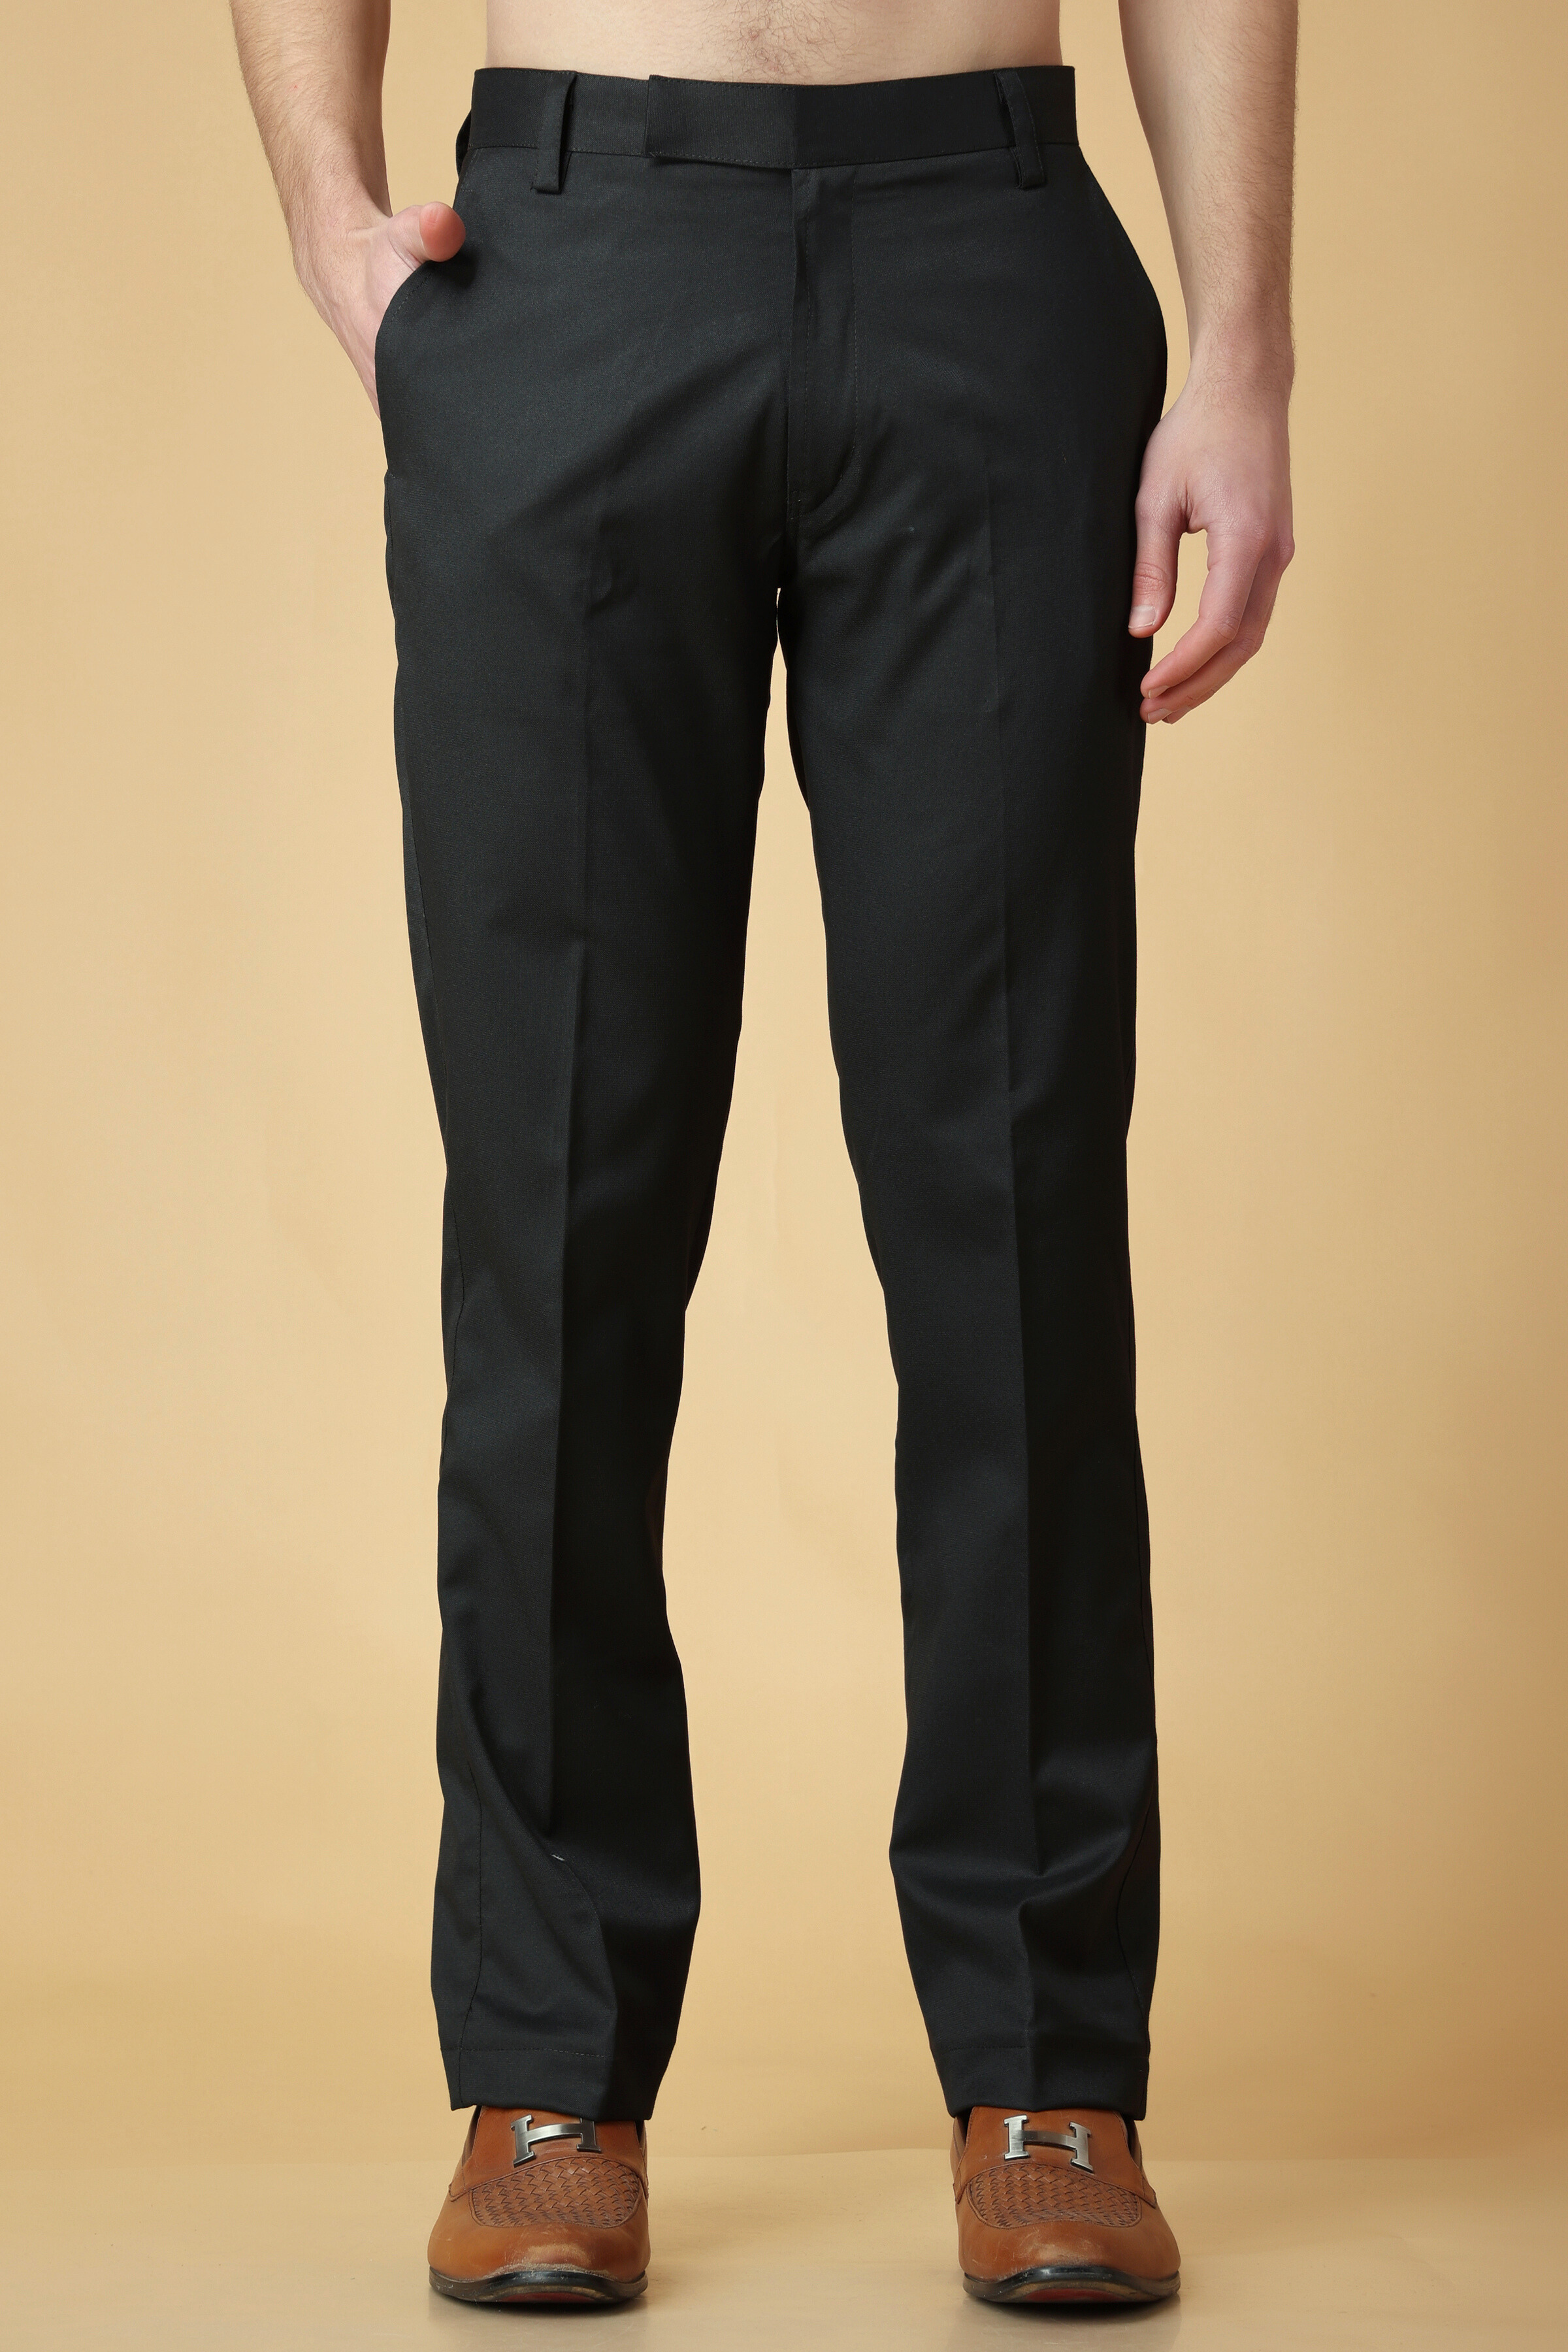 Designer Trousers for Men | Buy Men's Branded Trousers Online The Collective